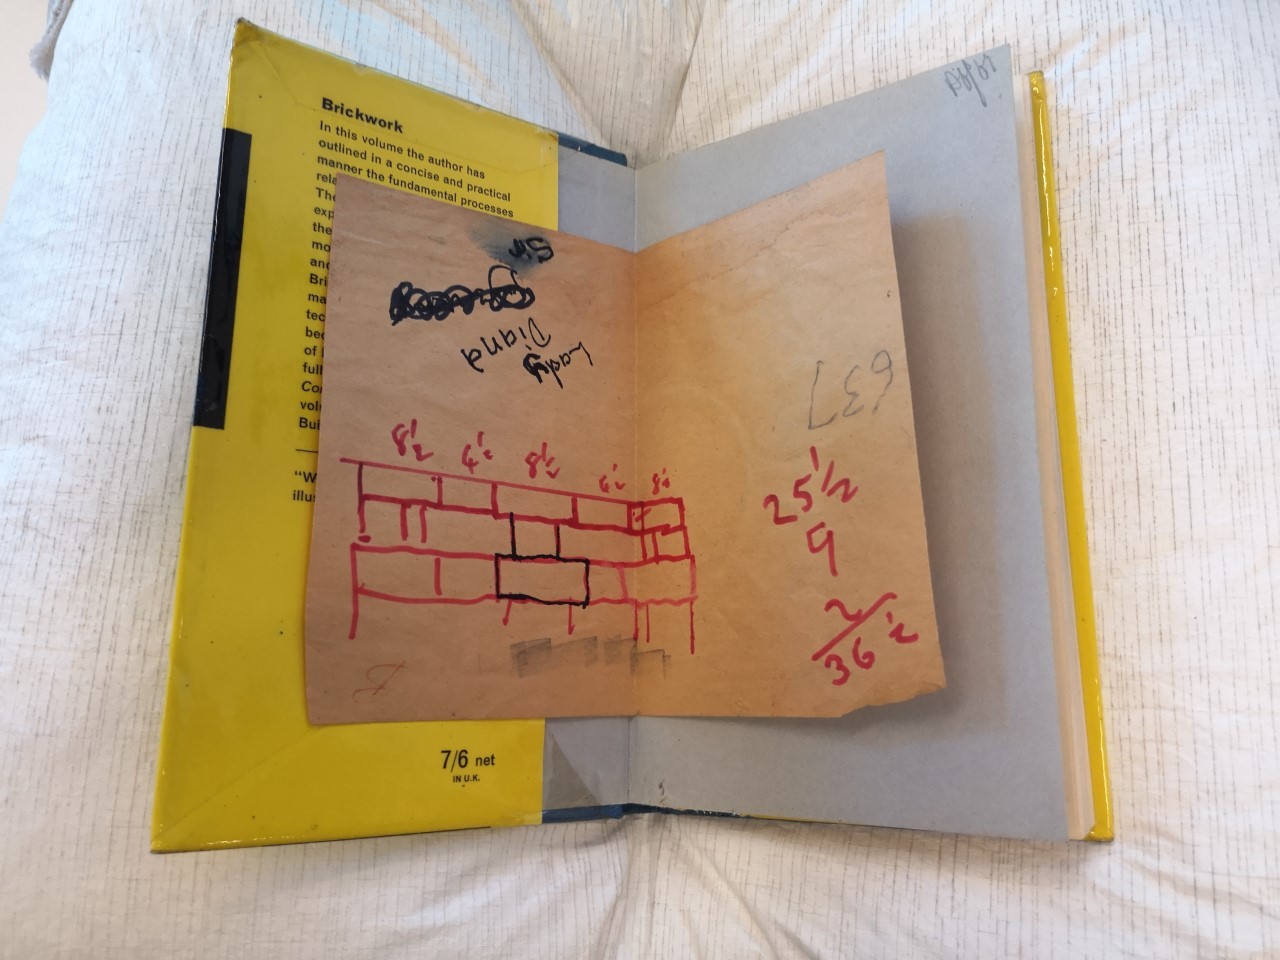 A photograph of a book open to the front page. Inserted in the book is a piece of paper with an image of a brick wall drawn in red pen, alongide some measurements. 